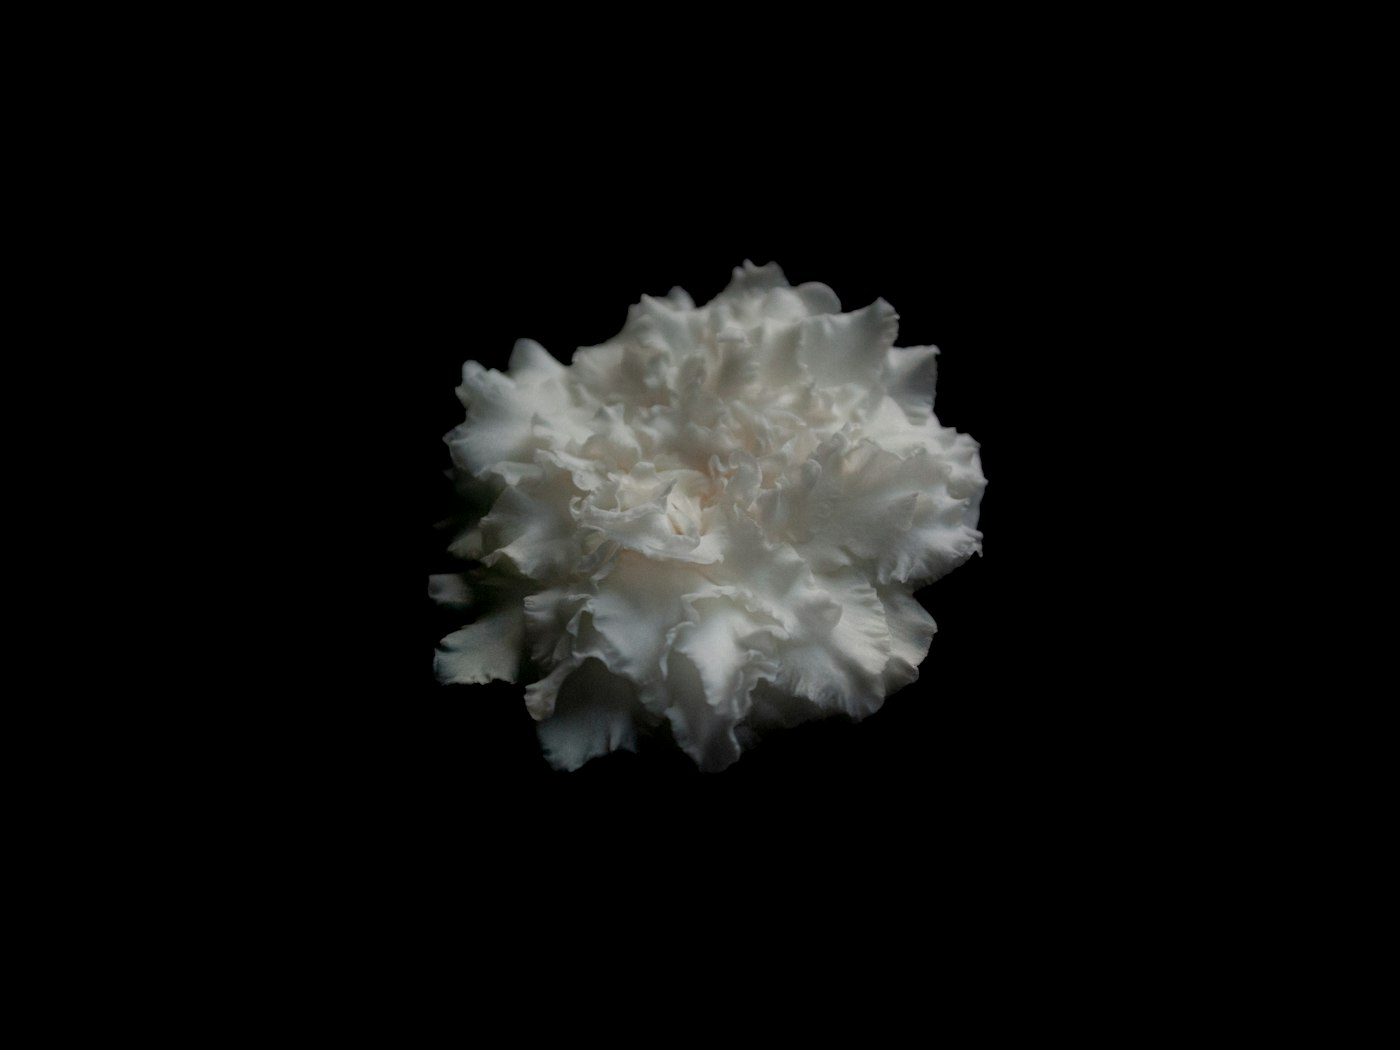 Close up of a white flower on a black background